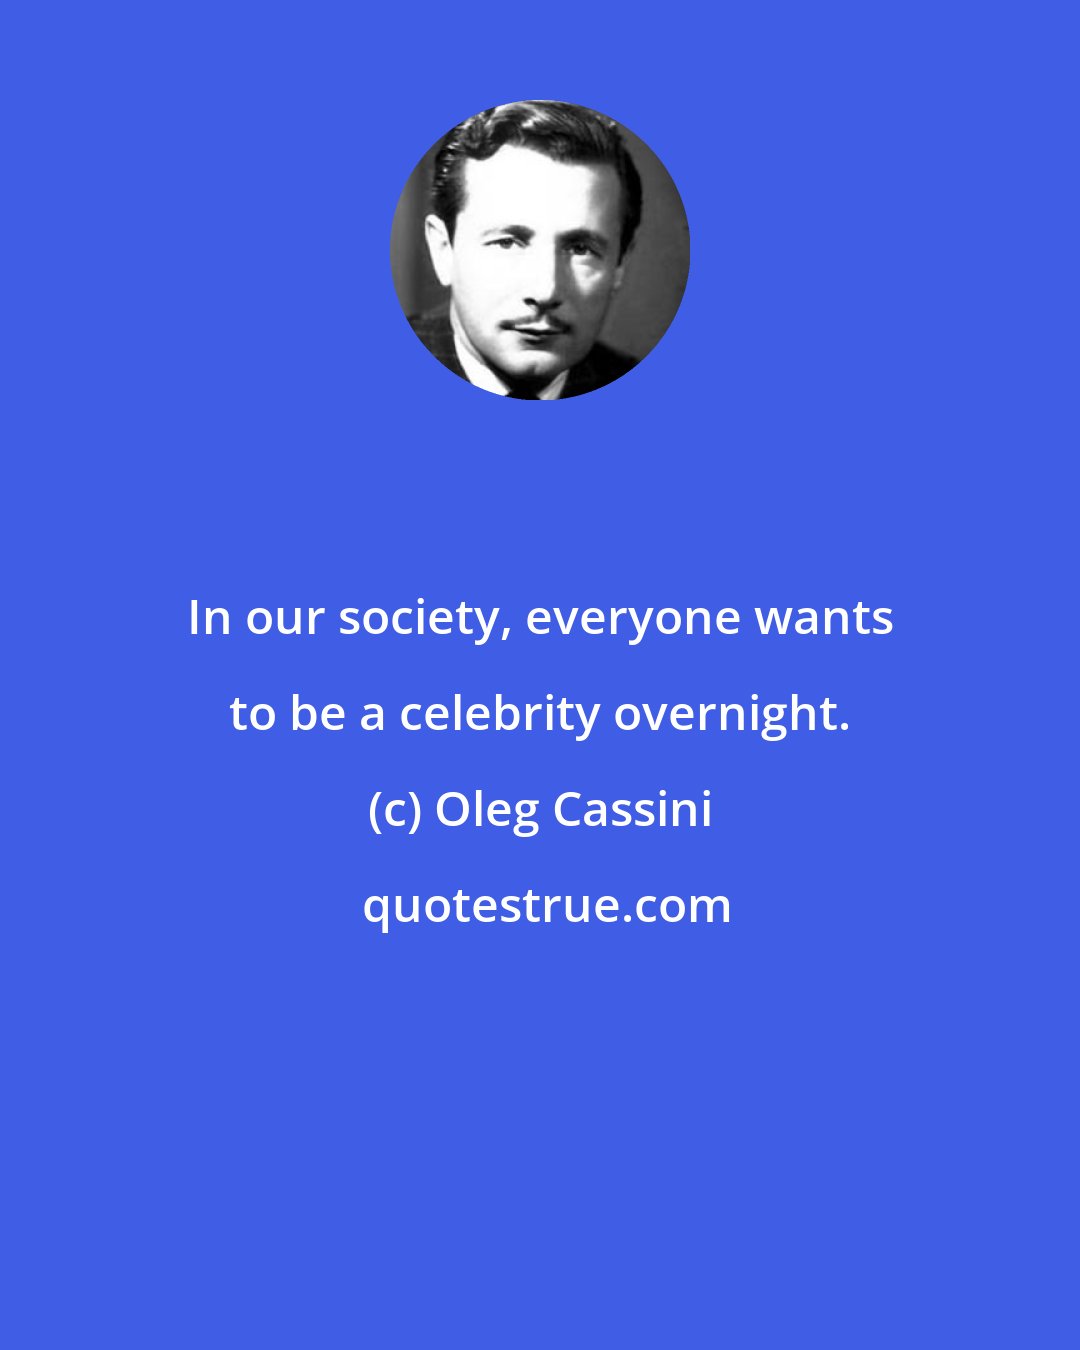 Oleg Cassini: In our society, everyone wants to be a celebrity overnight.